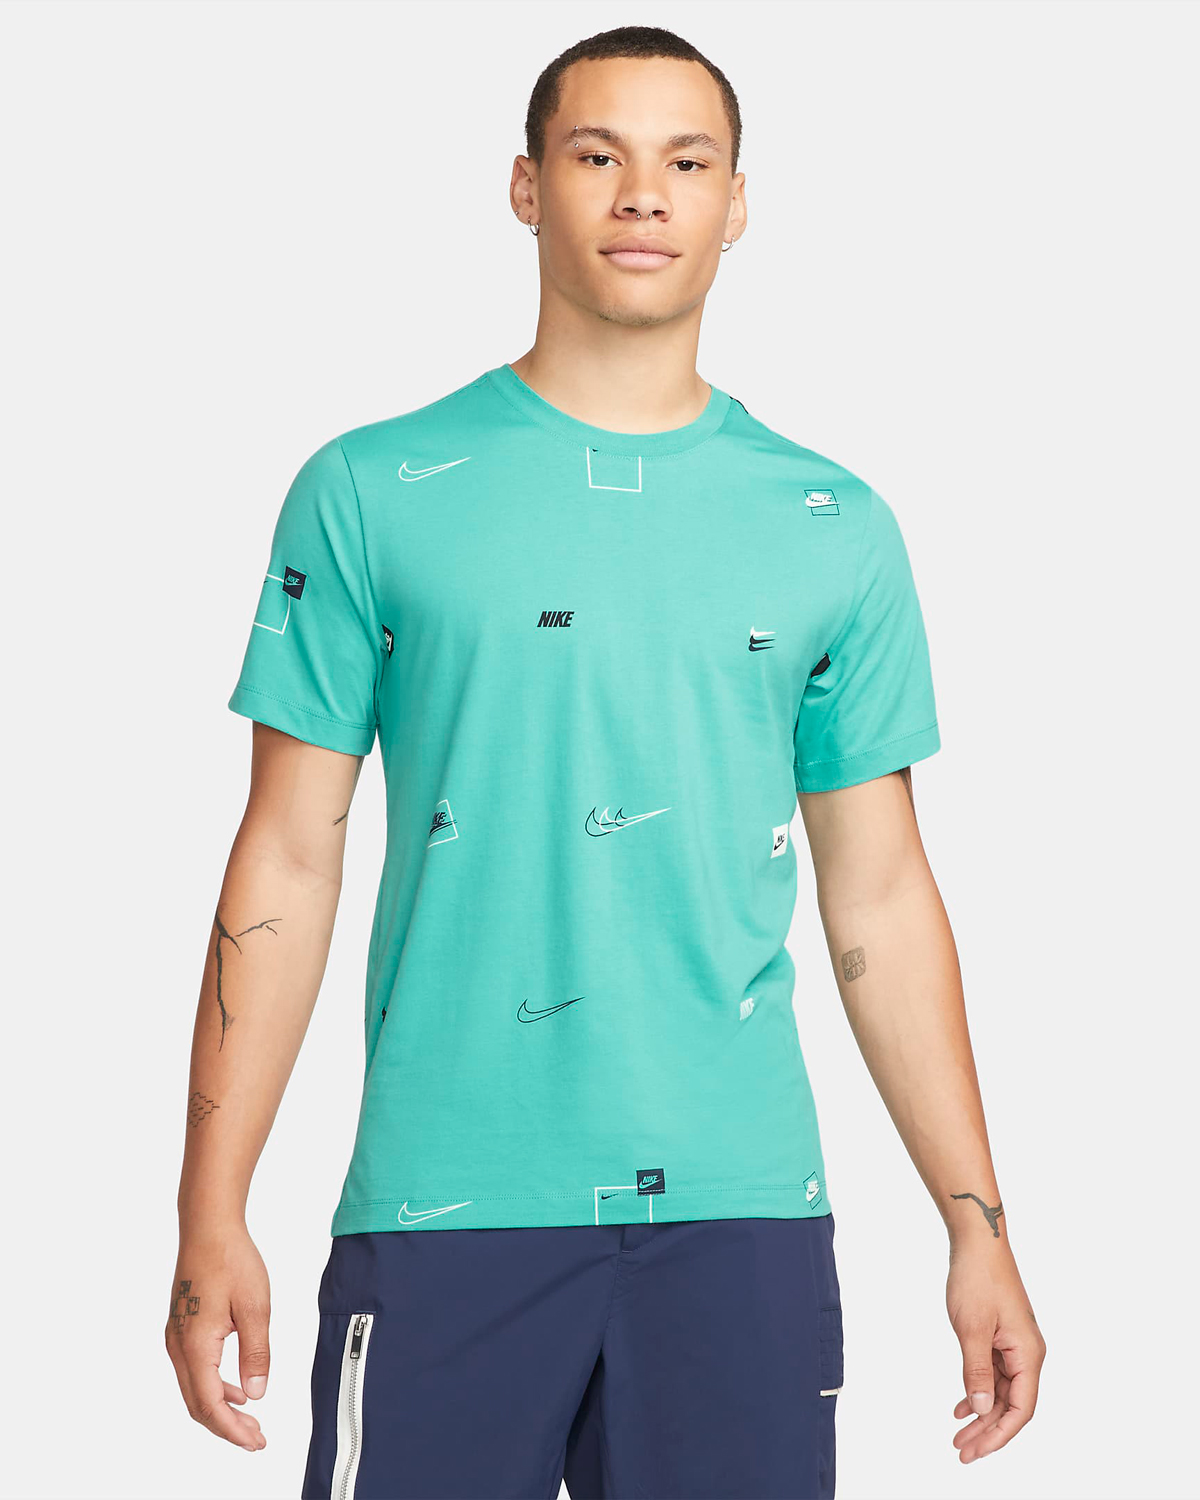 nike-sportswear-allover-print-t-shirt-washed-teal